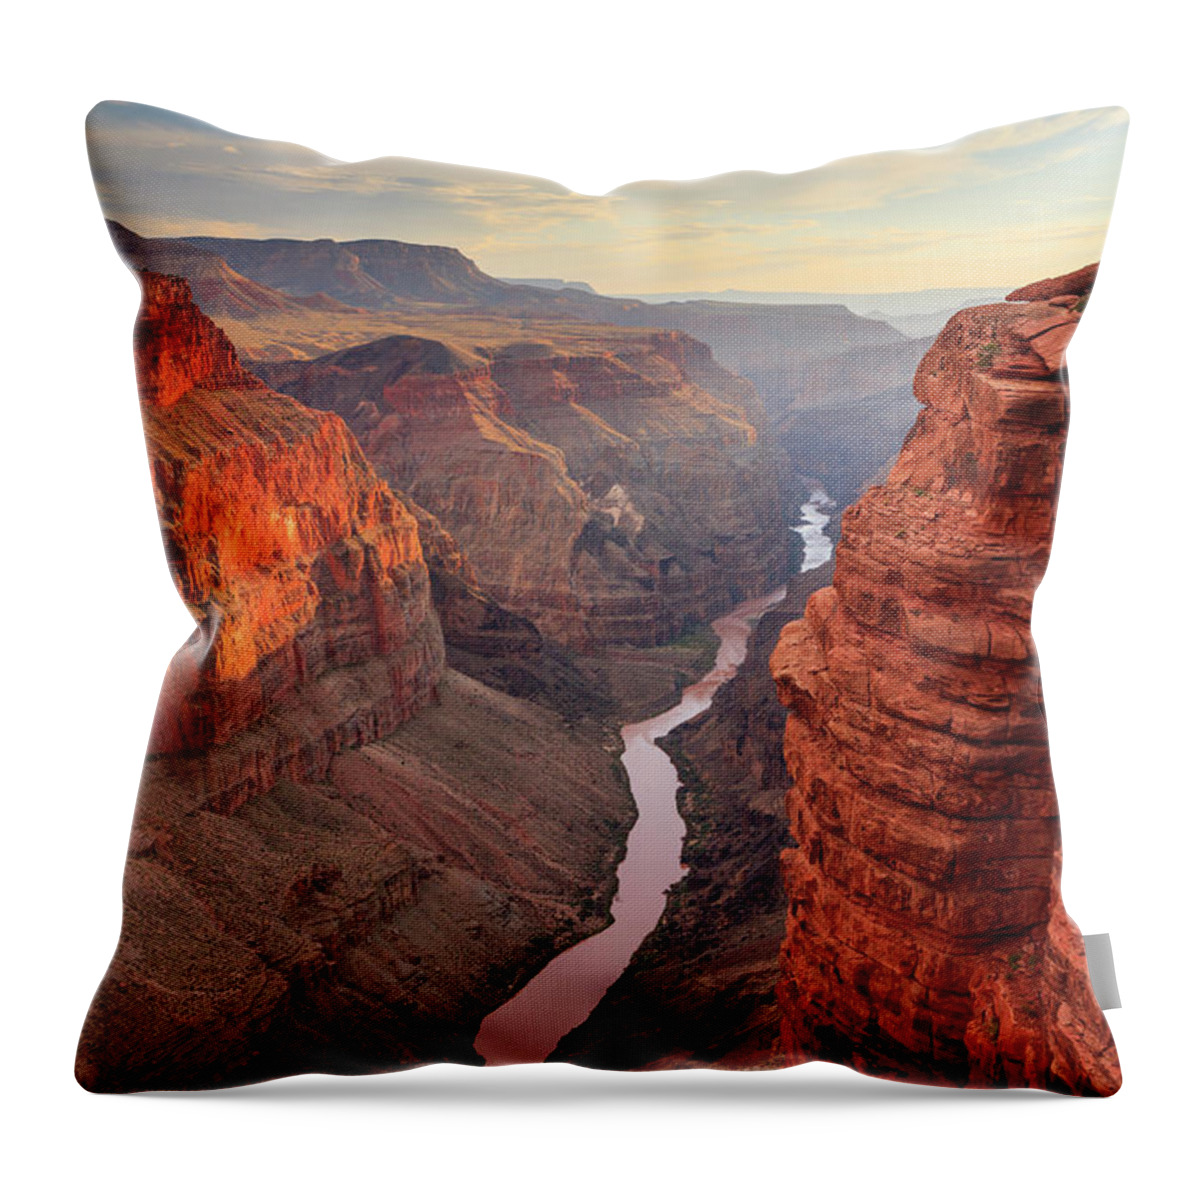 Tranquility Throw Pillow featuring the photograph Grand Canyon National Park by Michele Falzone